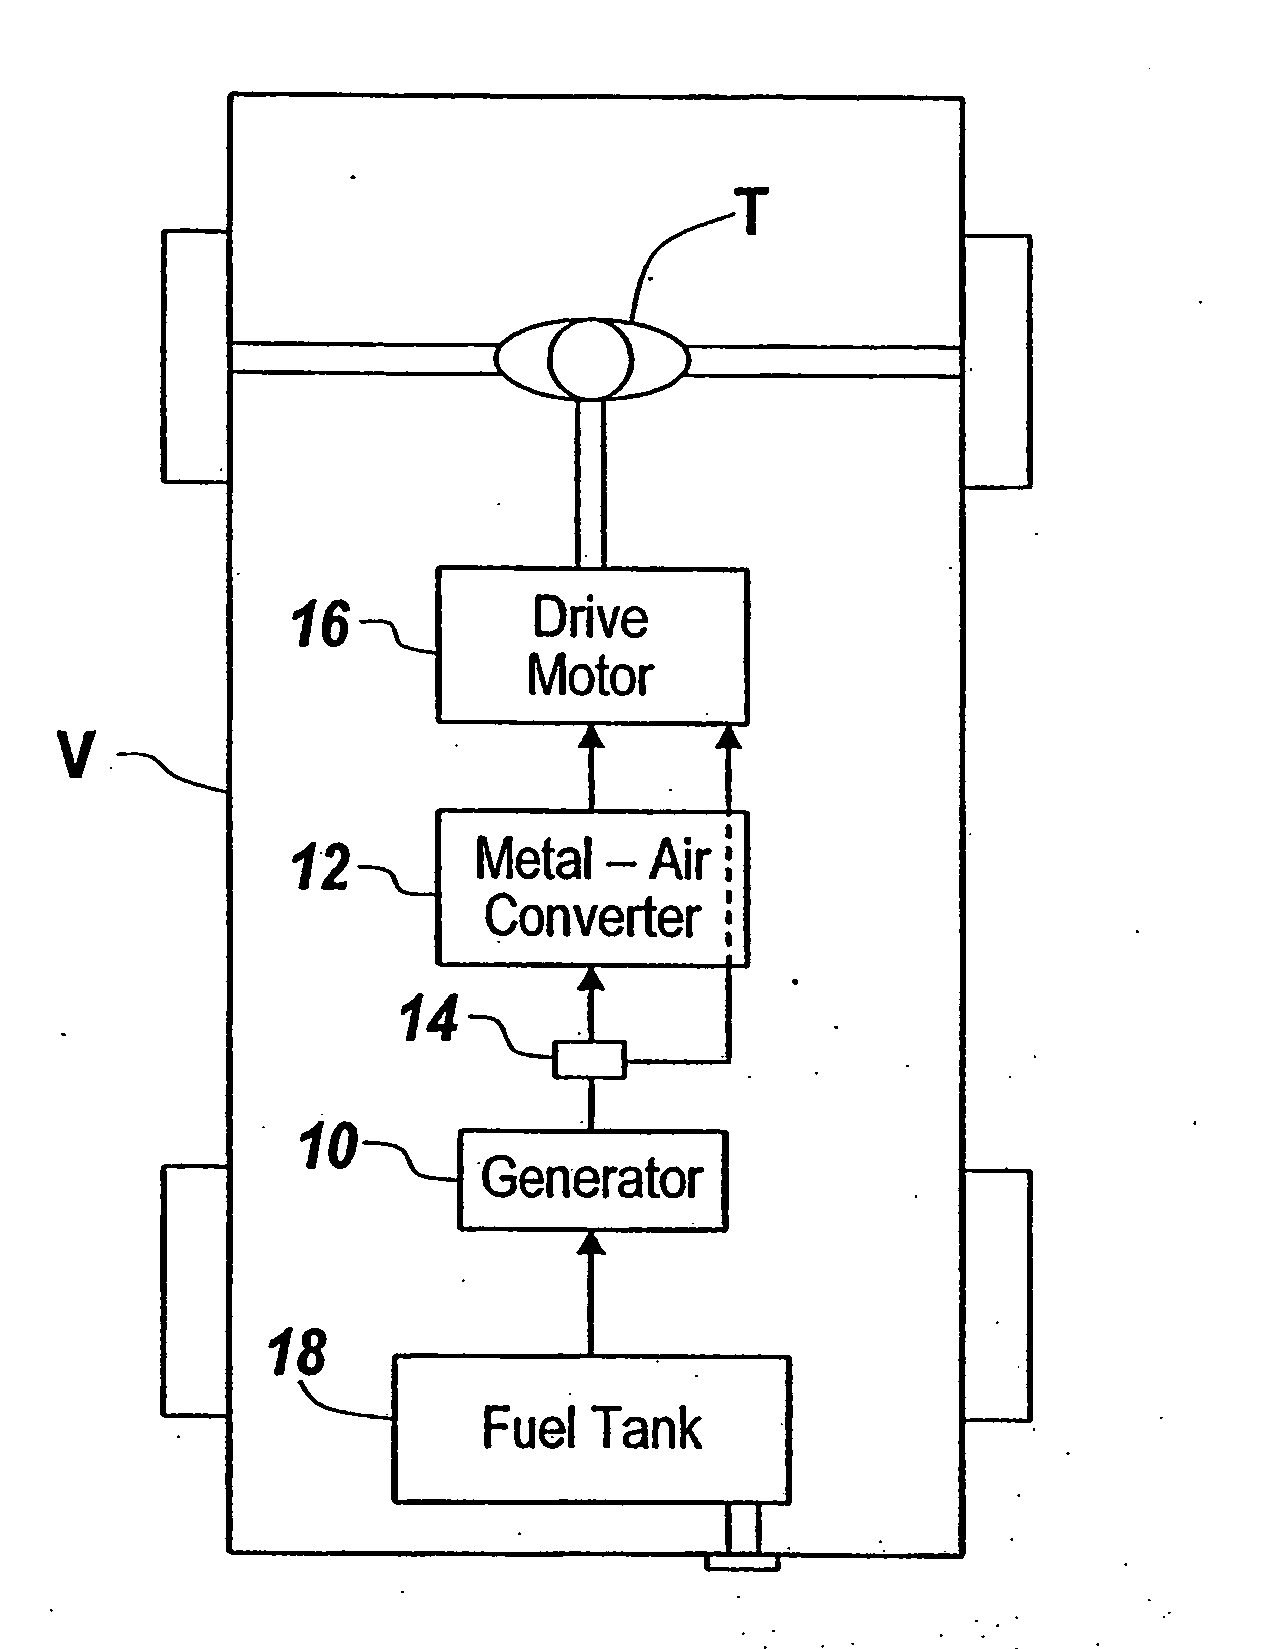 System and method for recharging a metal-air converter used for vehicle propulsion